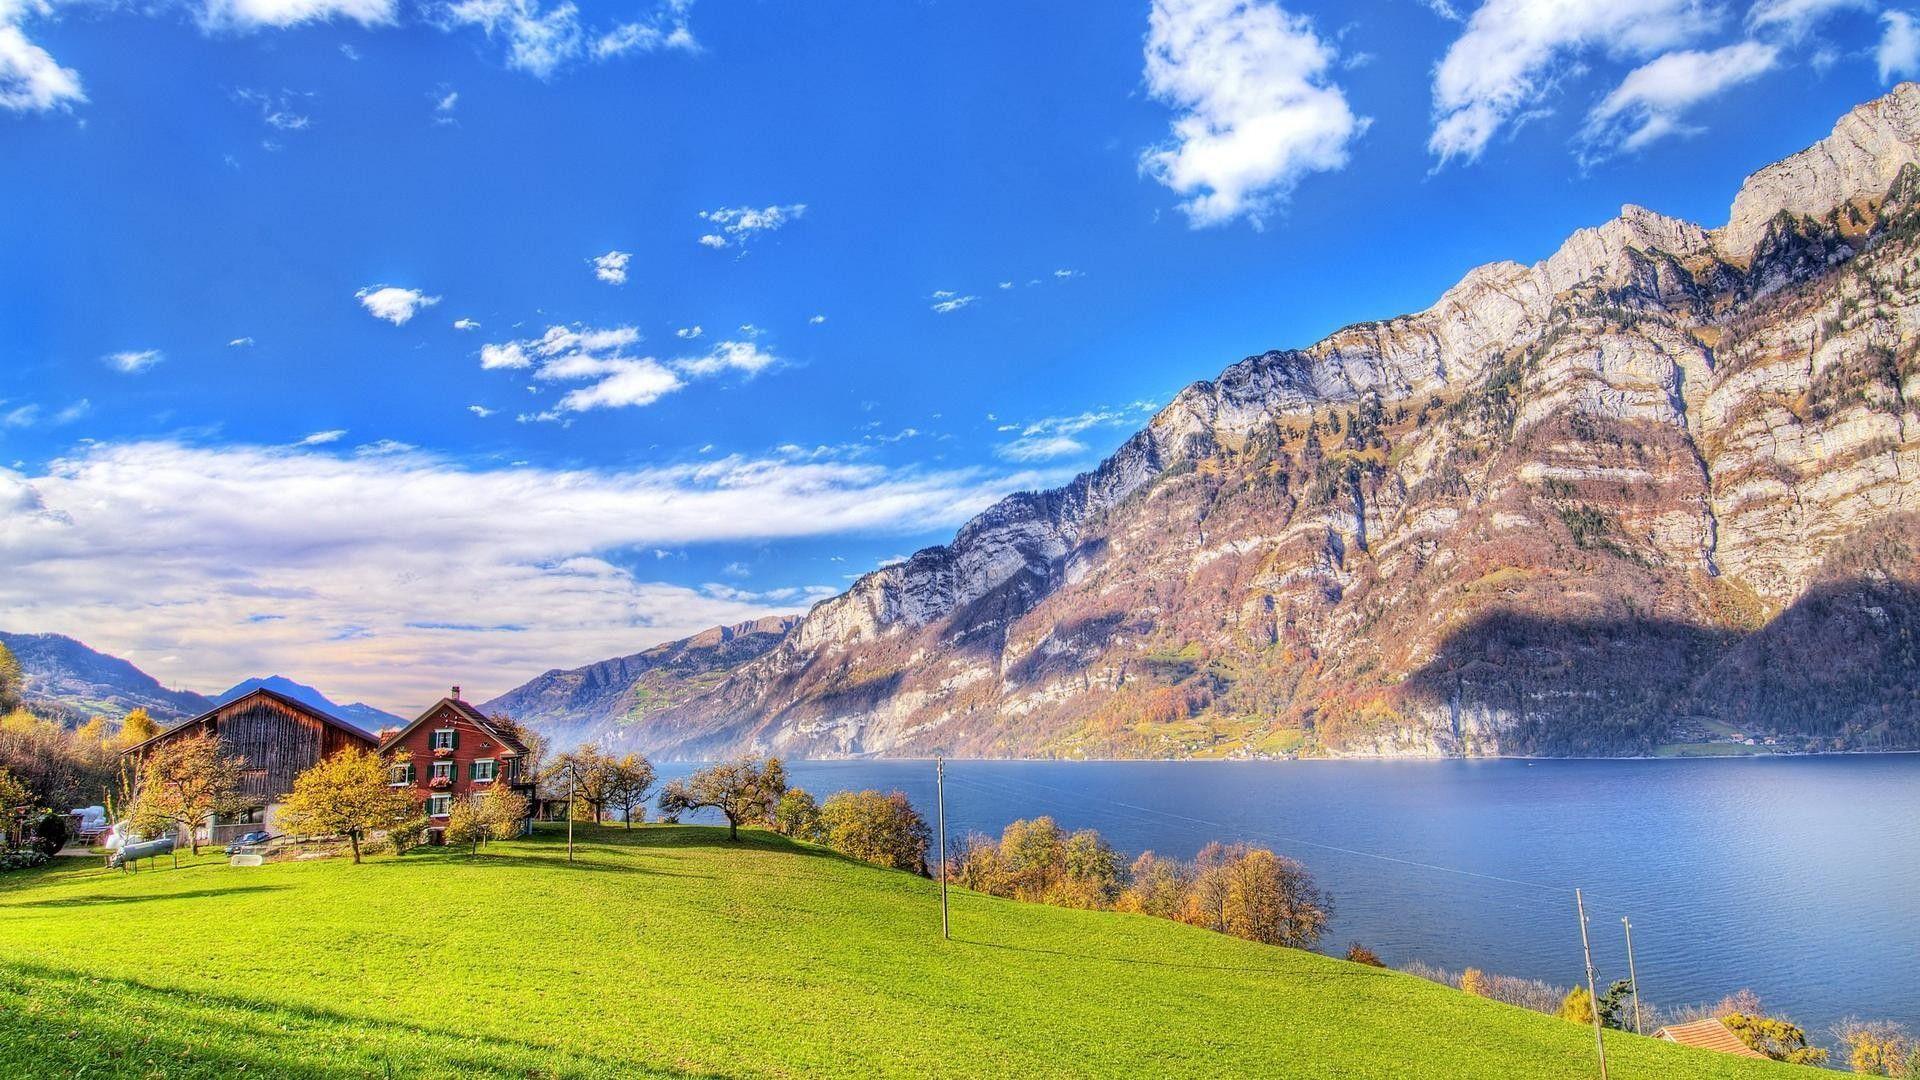 HD Switzerland Wallpaper and Photo. View High Quality Wallpaper